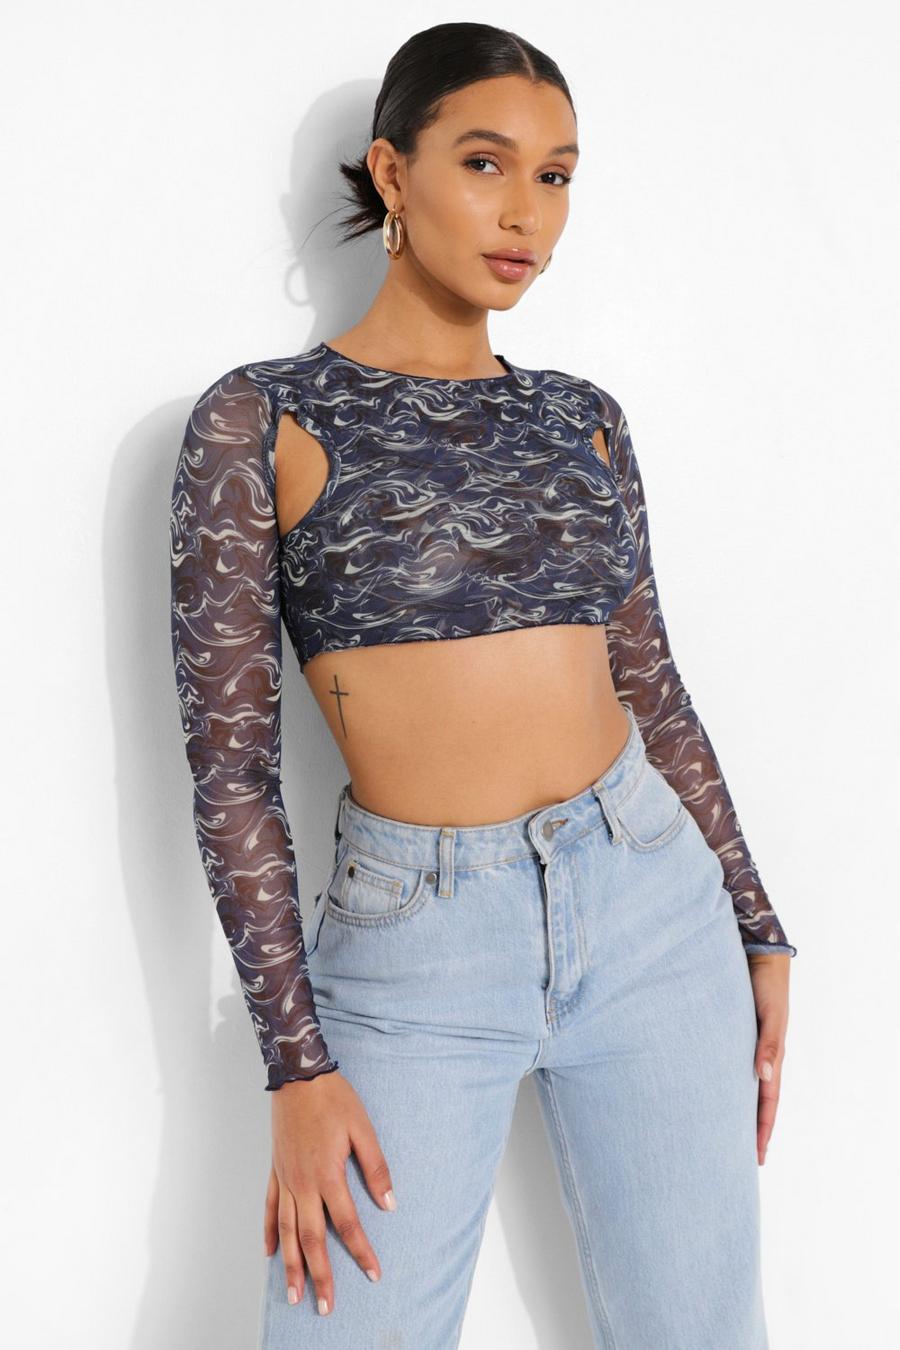 Blue Marble Printed Mesh Cut Out Crop Top